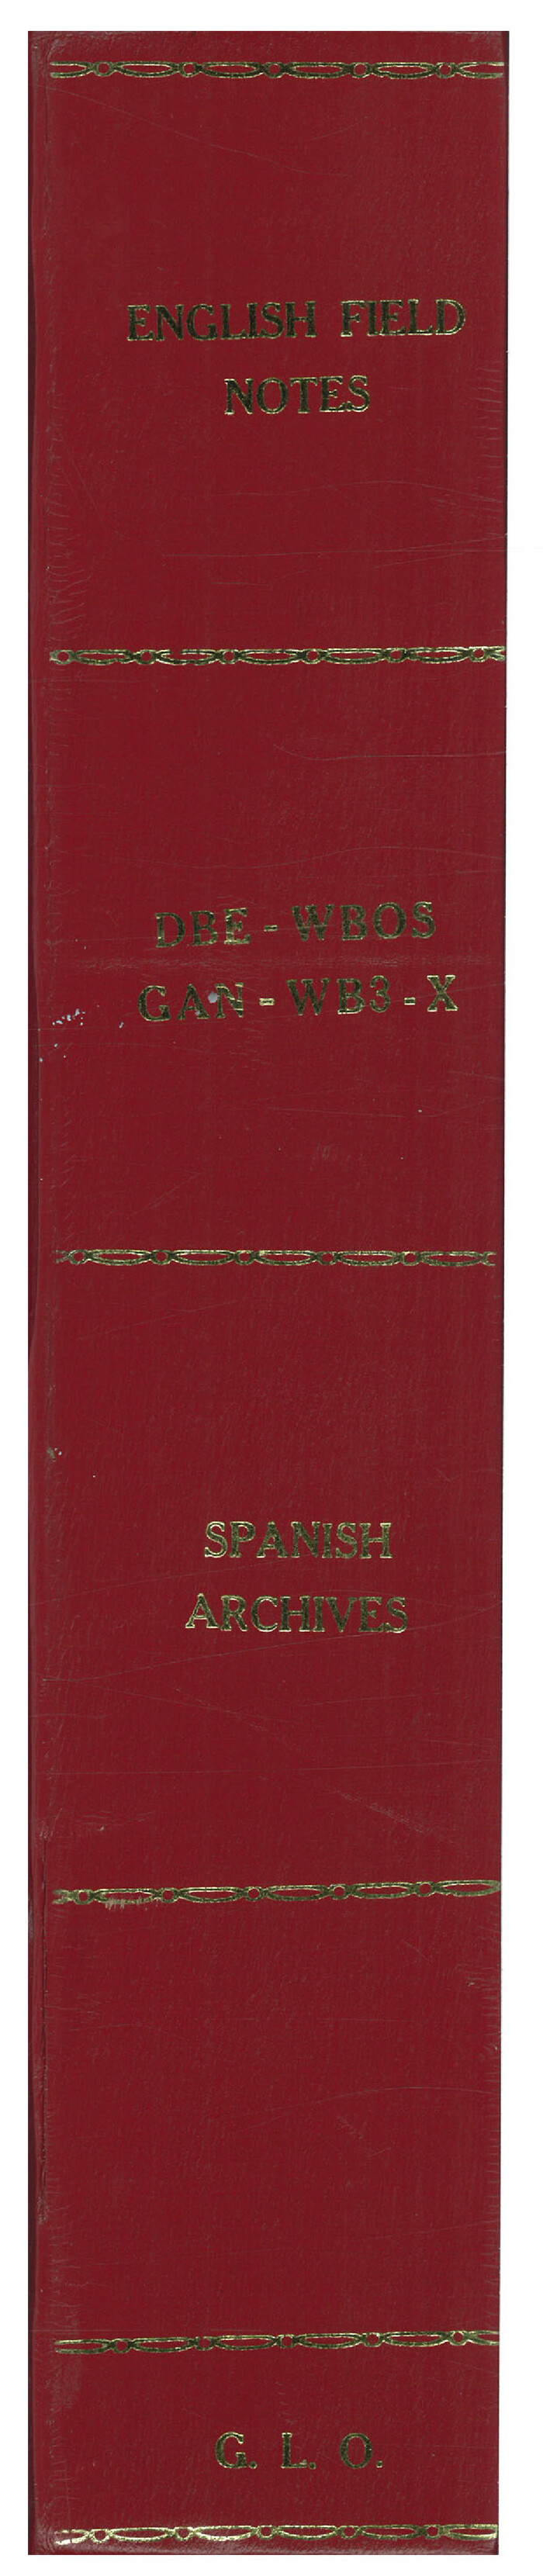 96546, English Field Notes of the Spanish Archives - Books DBE, WBPS, GAN, WB3, and X, Historical Volumes